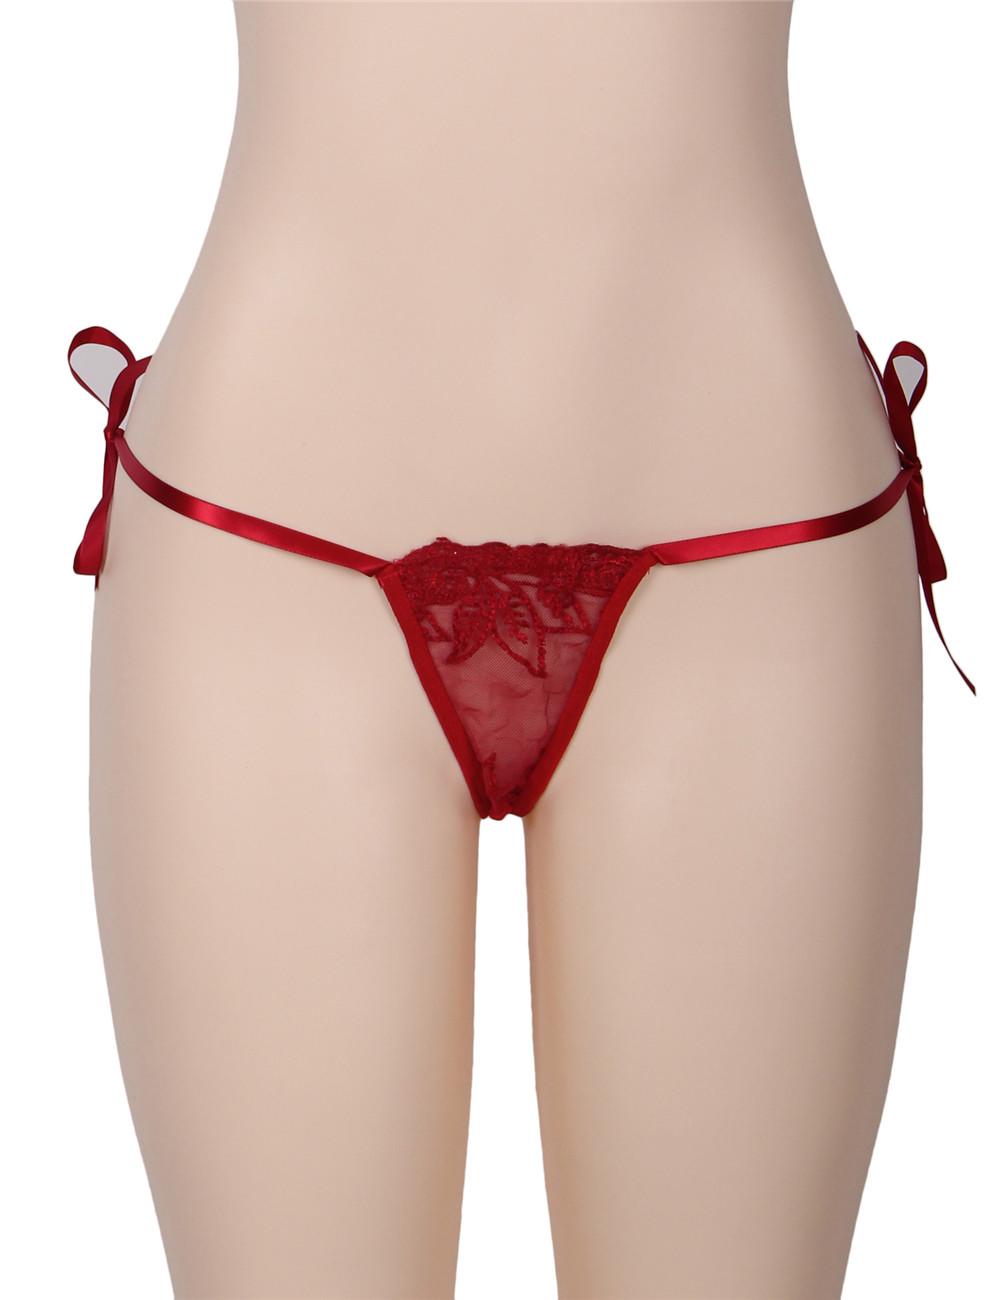 Red tie front G-string